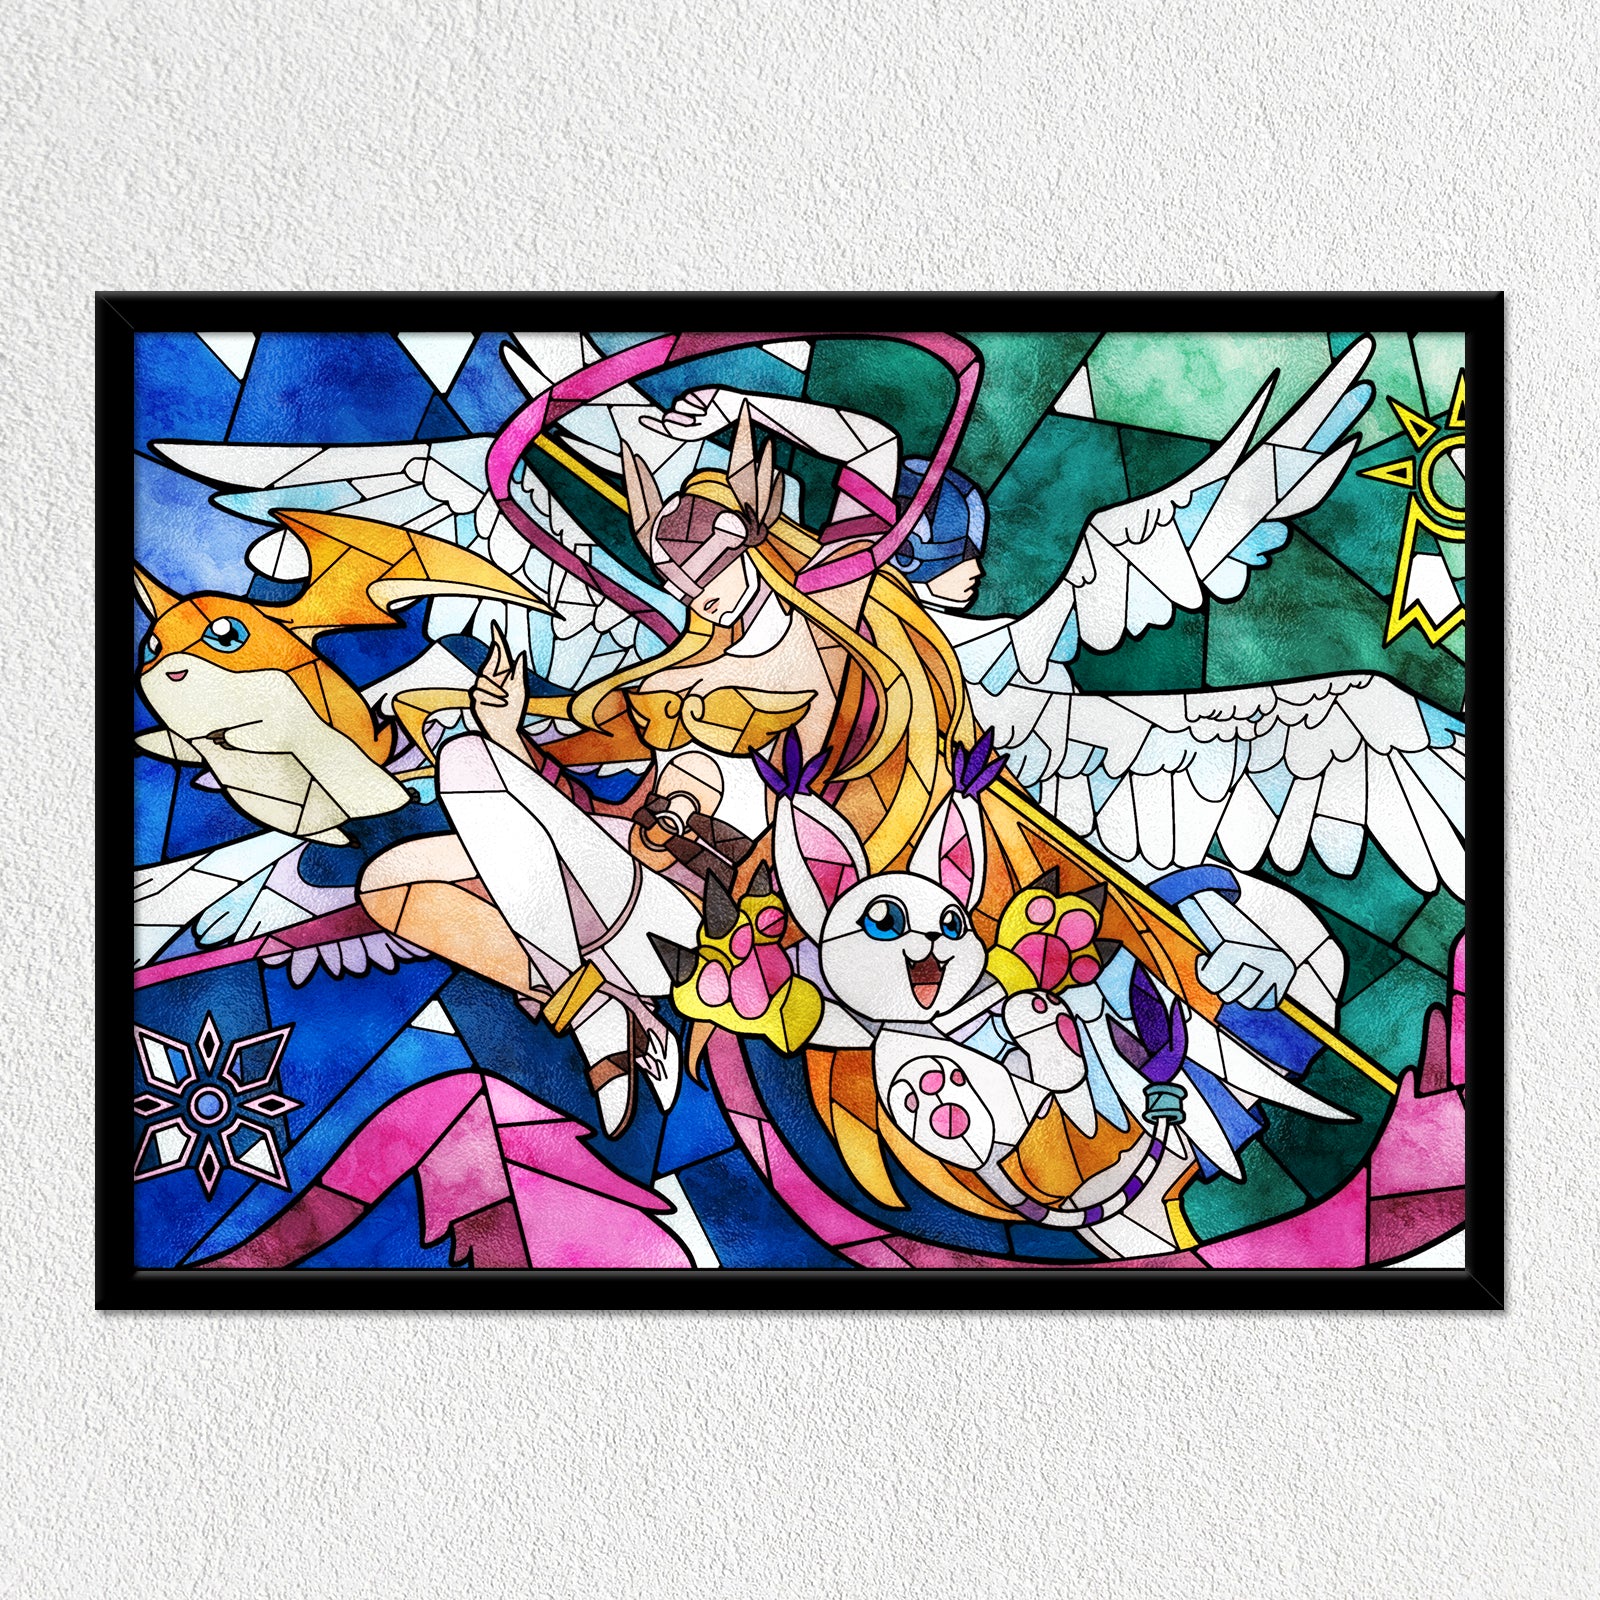 Hope & Light Angels Stained Glass Mounted Art Print